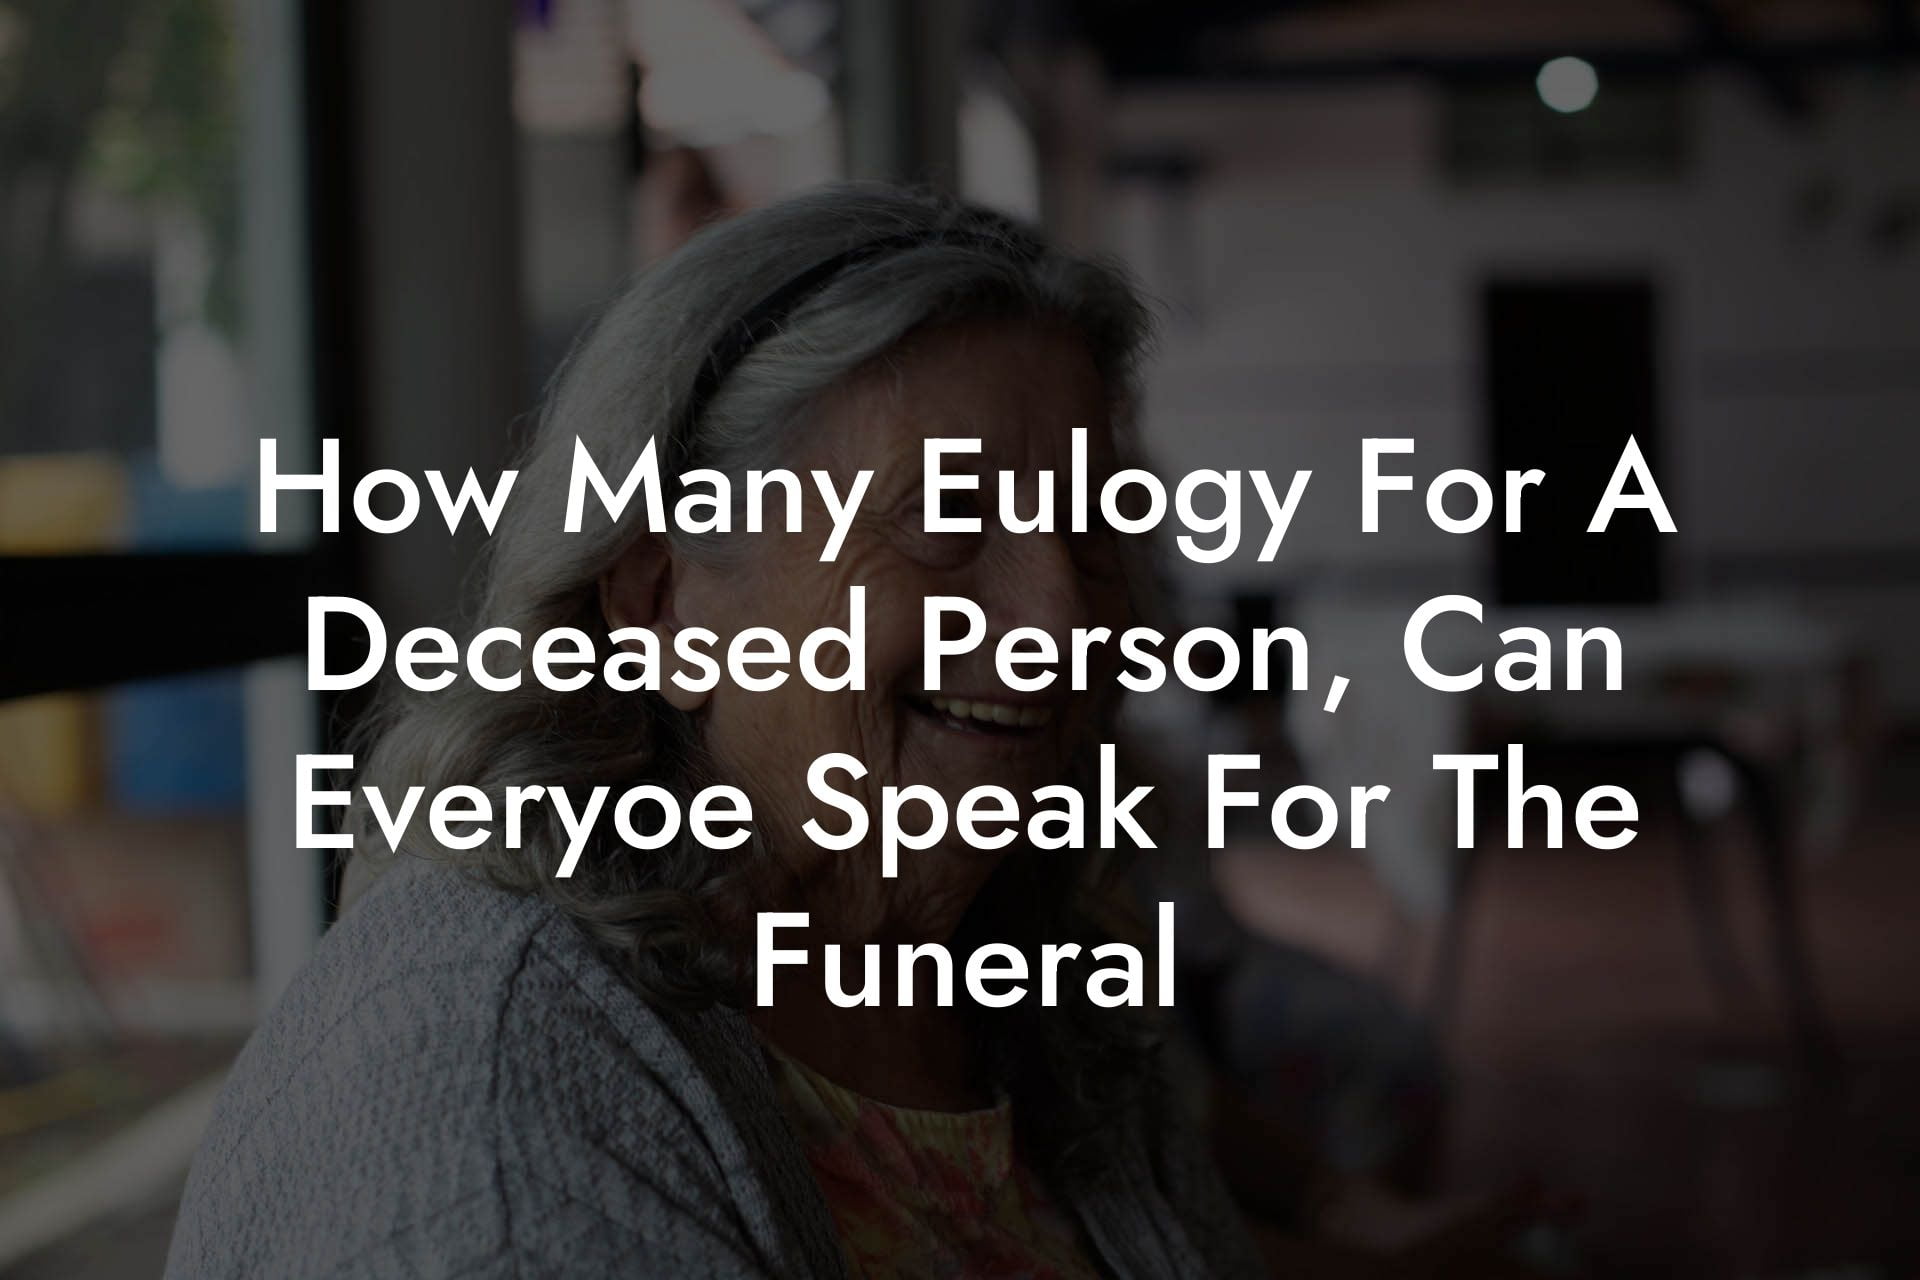 How Many Eulogy For A Deceased Person, Can Everyoe Speak For The Funeral